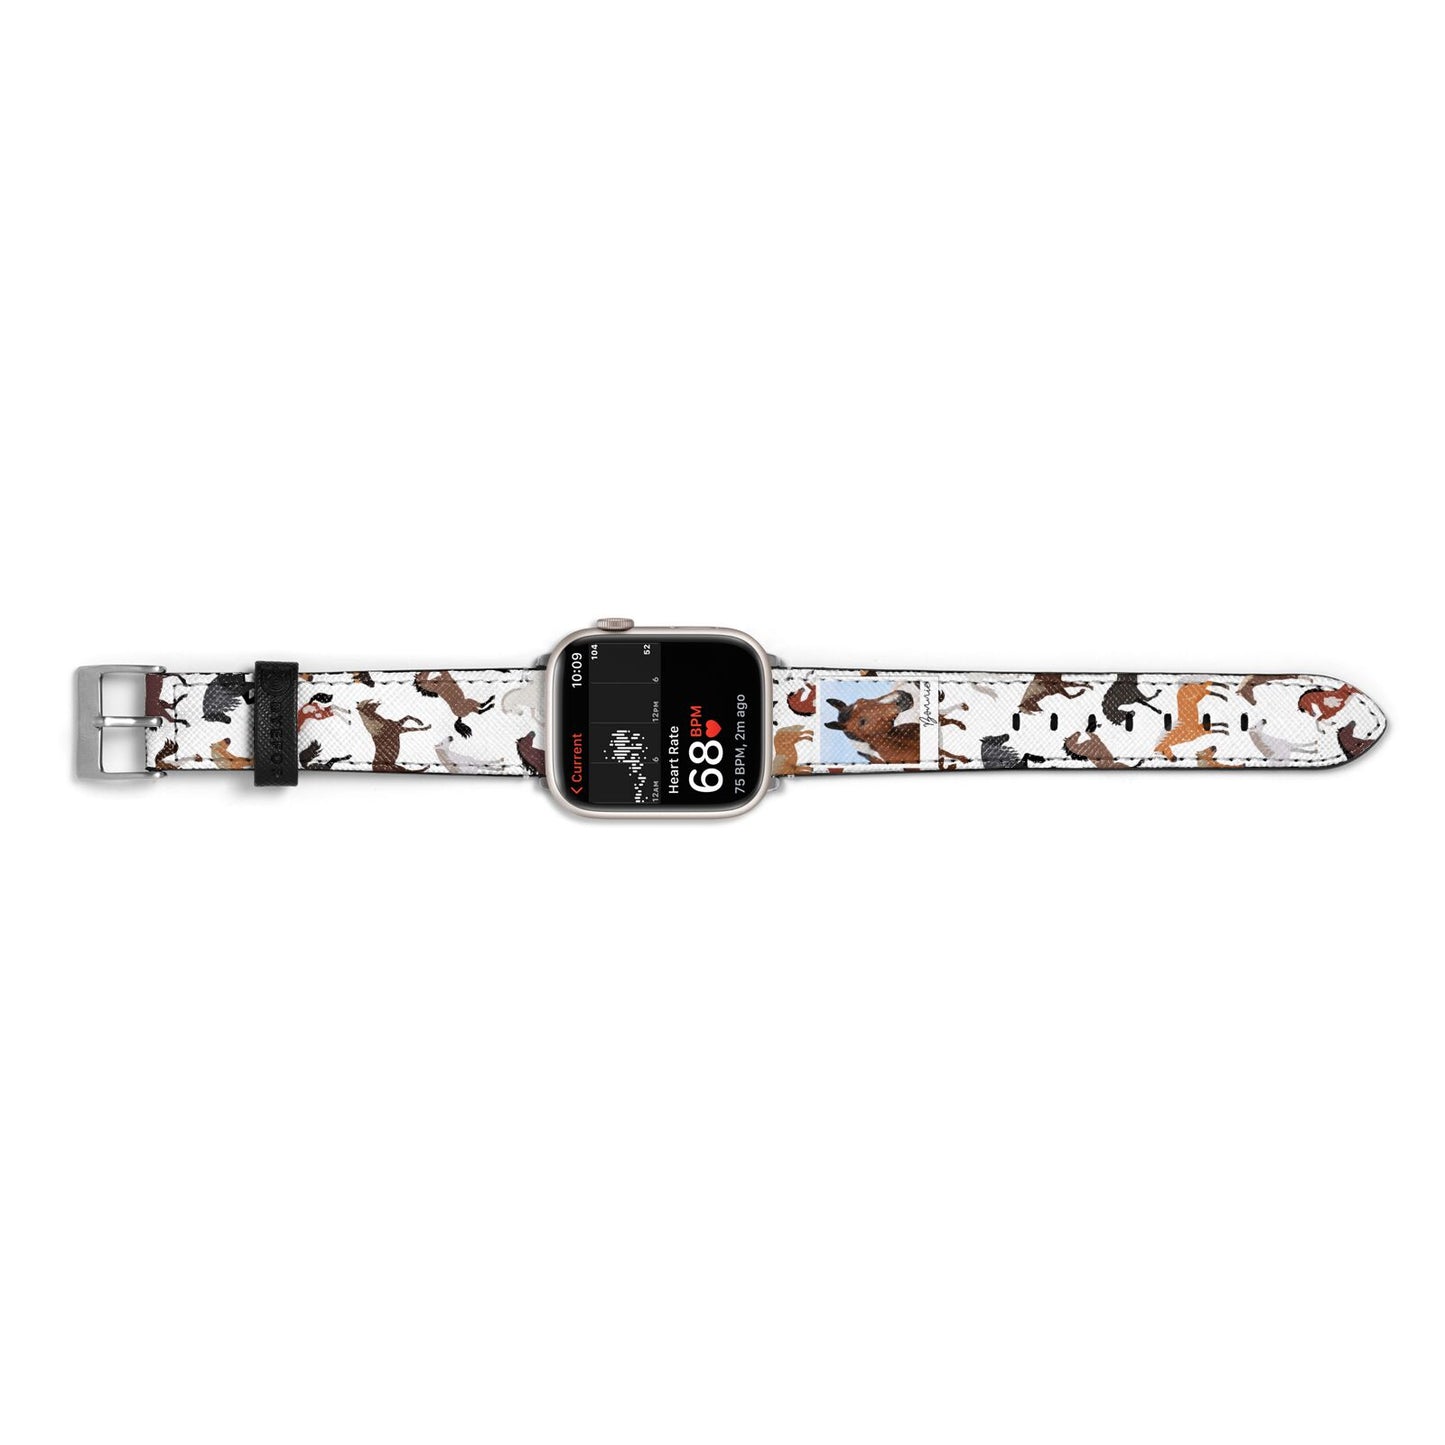 Personalised Horse Photo Apple Watch Strap Size 38mm Landscape Image Silver Hardware